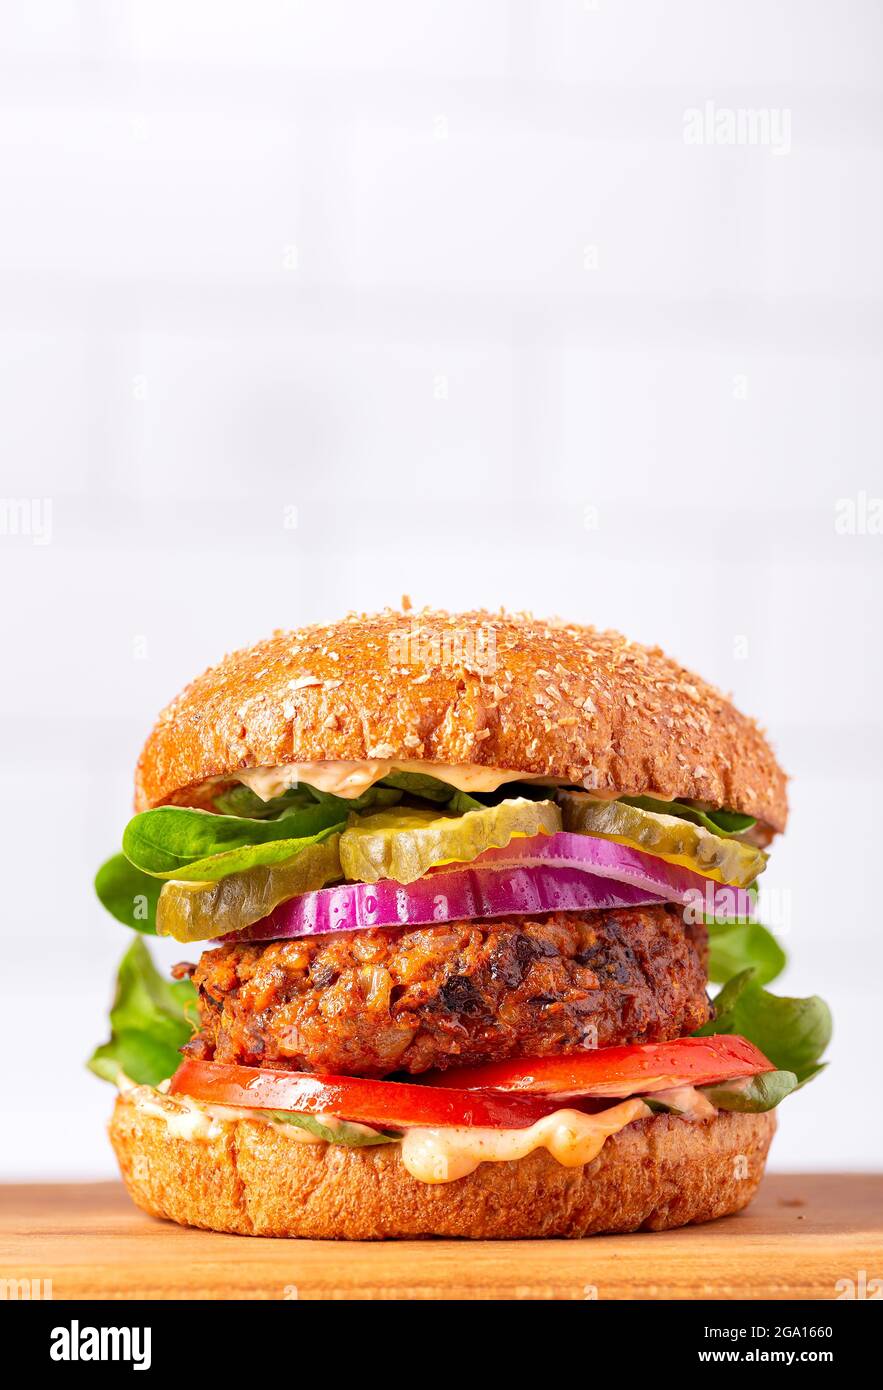 Homemade plant based burger made from sweet potato, black beans and brown rice on a wholegrain brioche bun; copy space Stock Photo